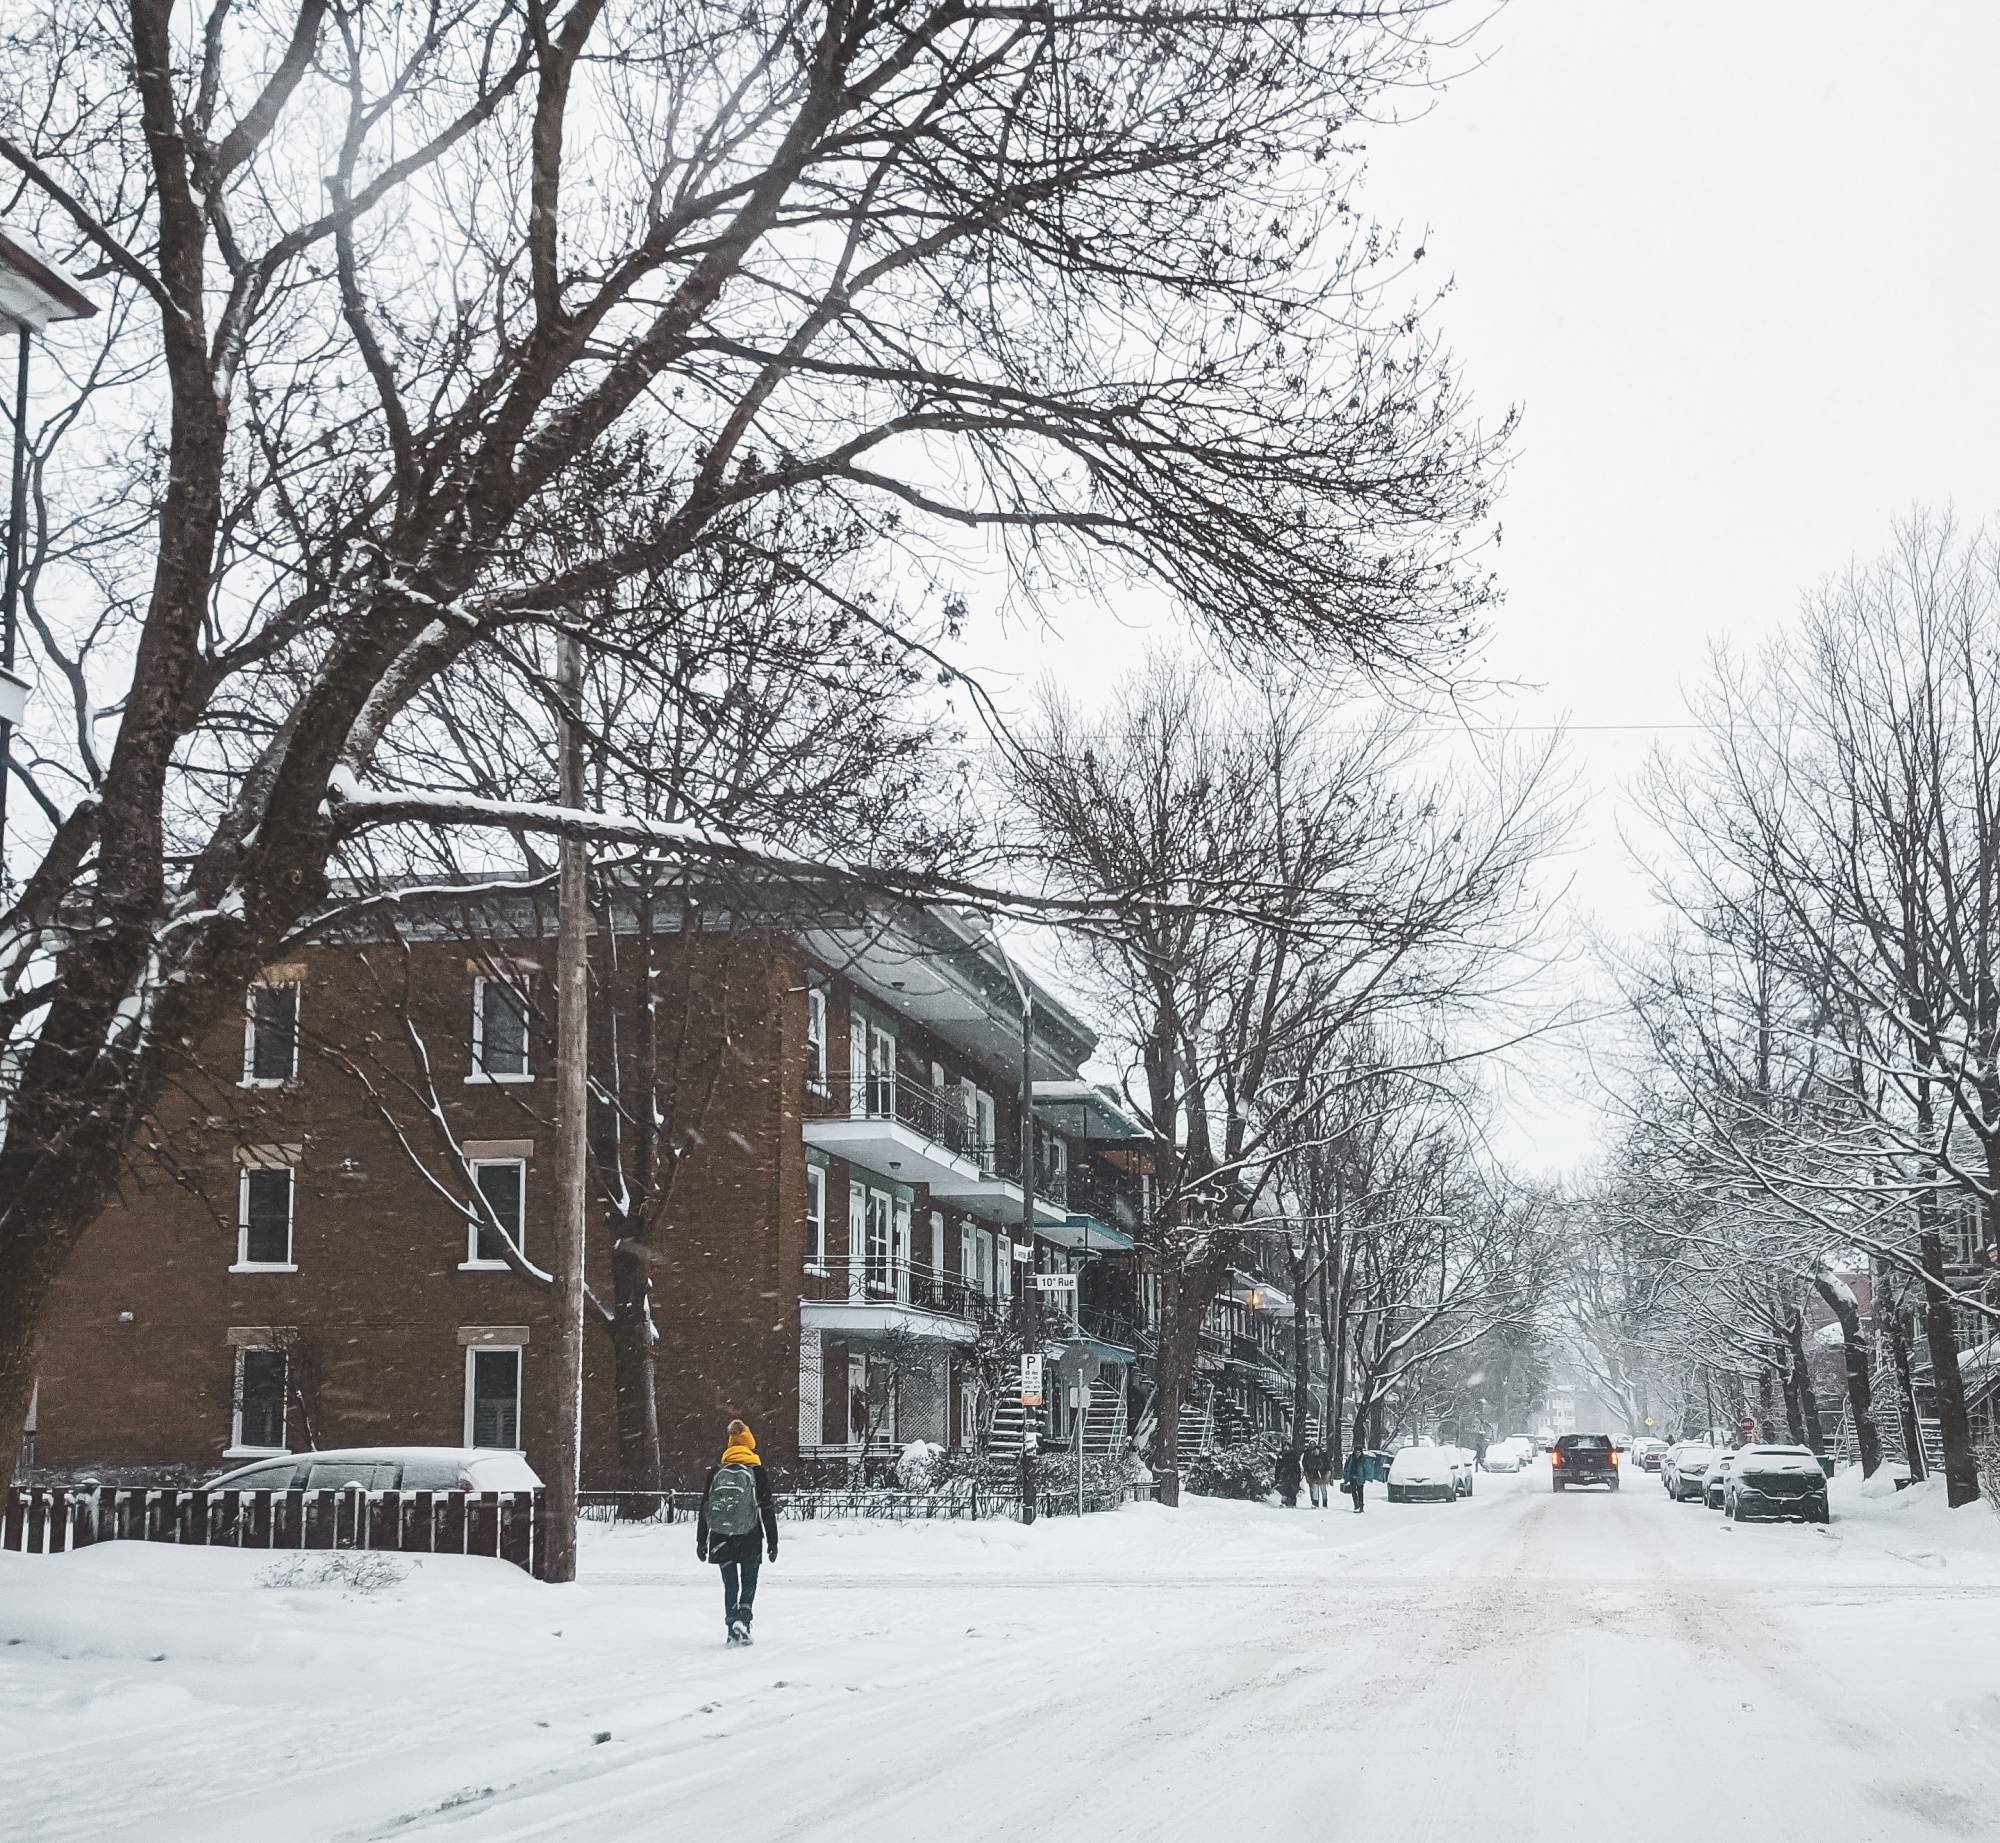 A snowy city street with brown brick houses and trees.